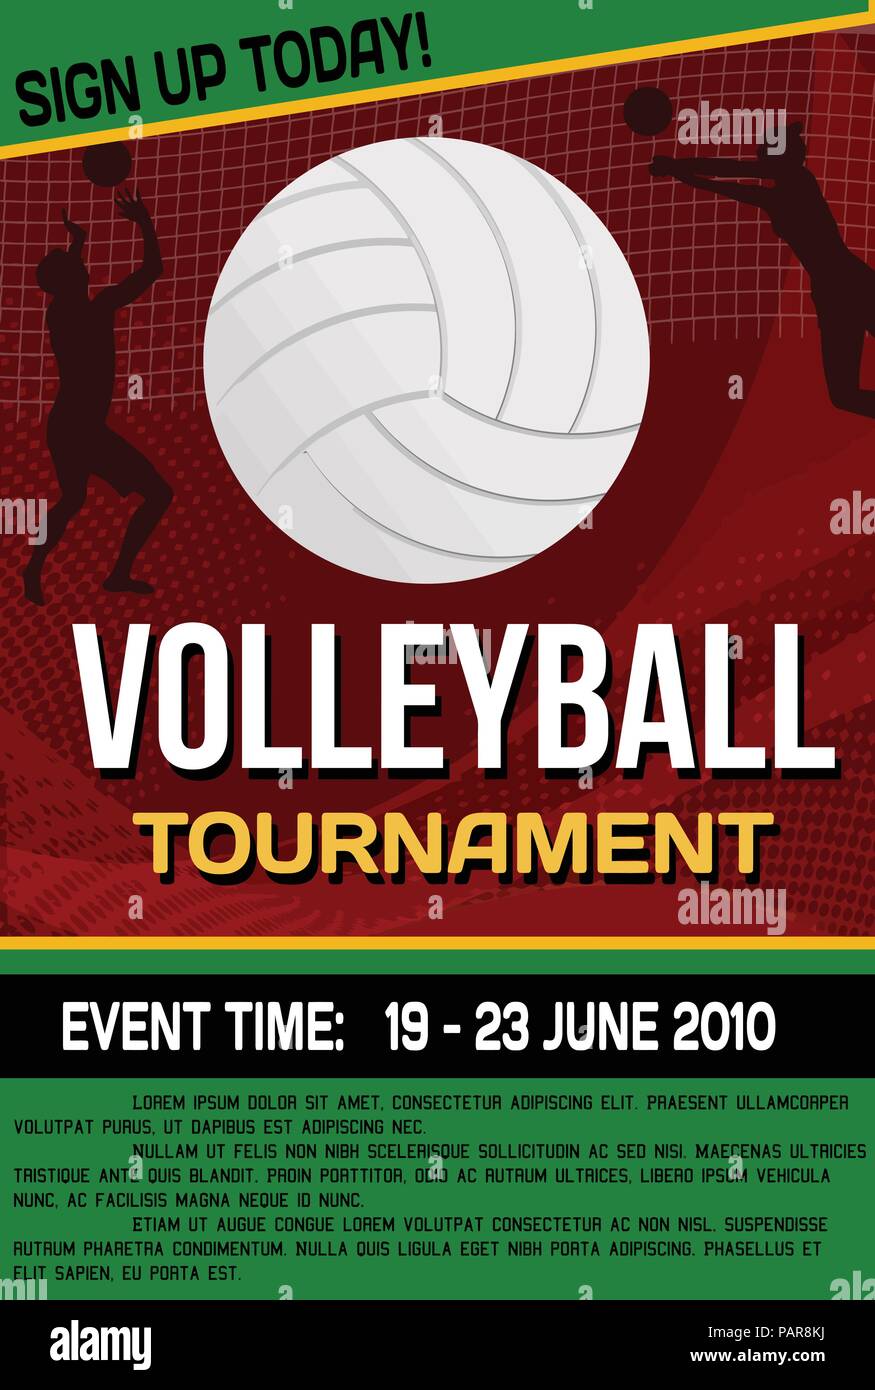 Volleyball tournament flyer or poster background, vector illustration Stock Vector